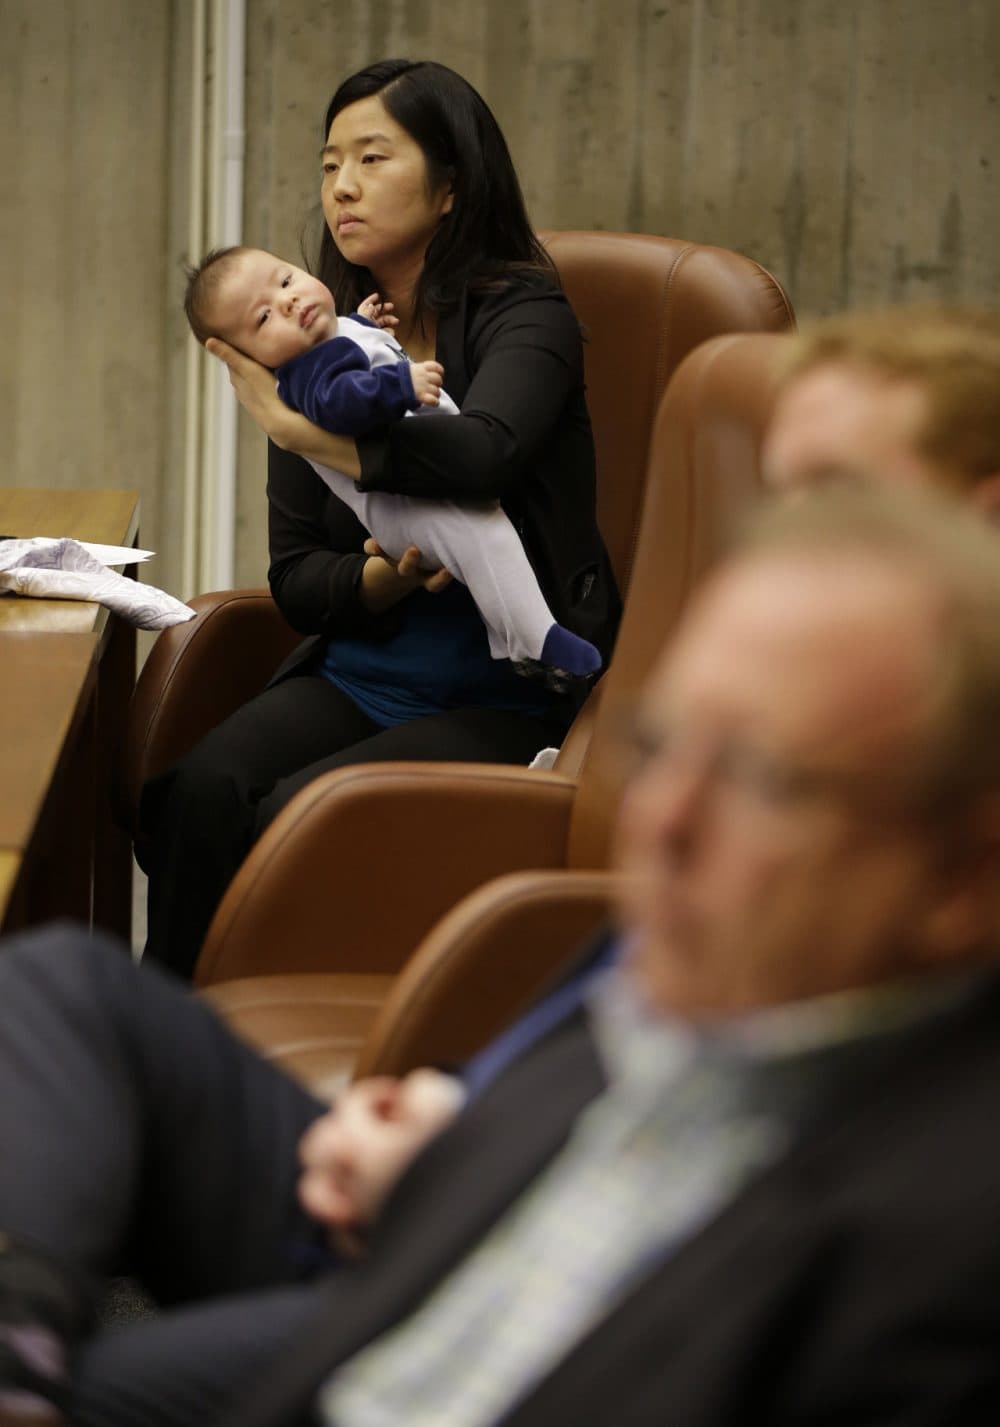 Boston City Councilwoman Michelle Wu holds her eleven week-old son Blaise Pawarski as members of Boston 2024 answer questions during the first meeting of the Boston City Council on the city's bid to be awarded the 2024 Summer Olympics, Friday March 6, 2015, at City Hall in Boston.  (AP)